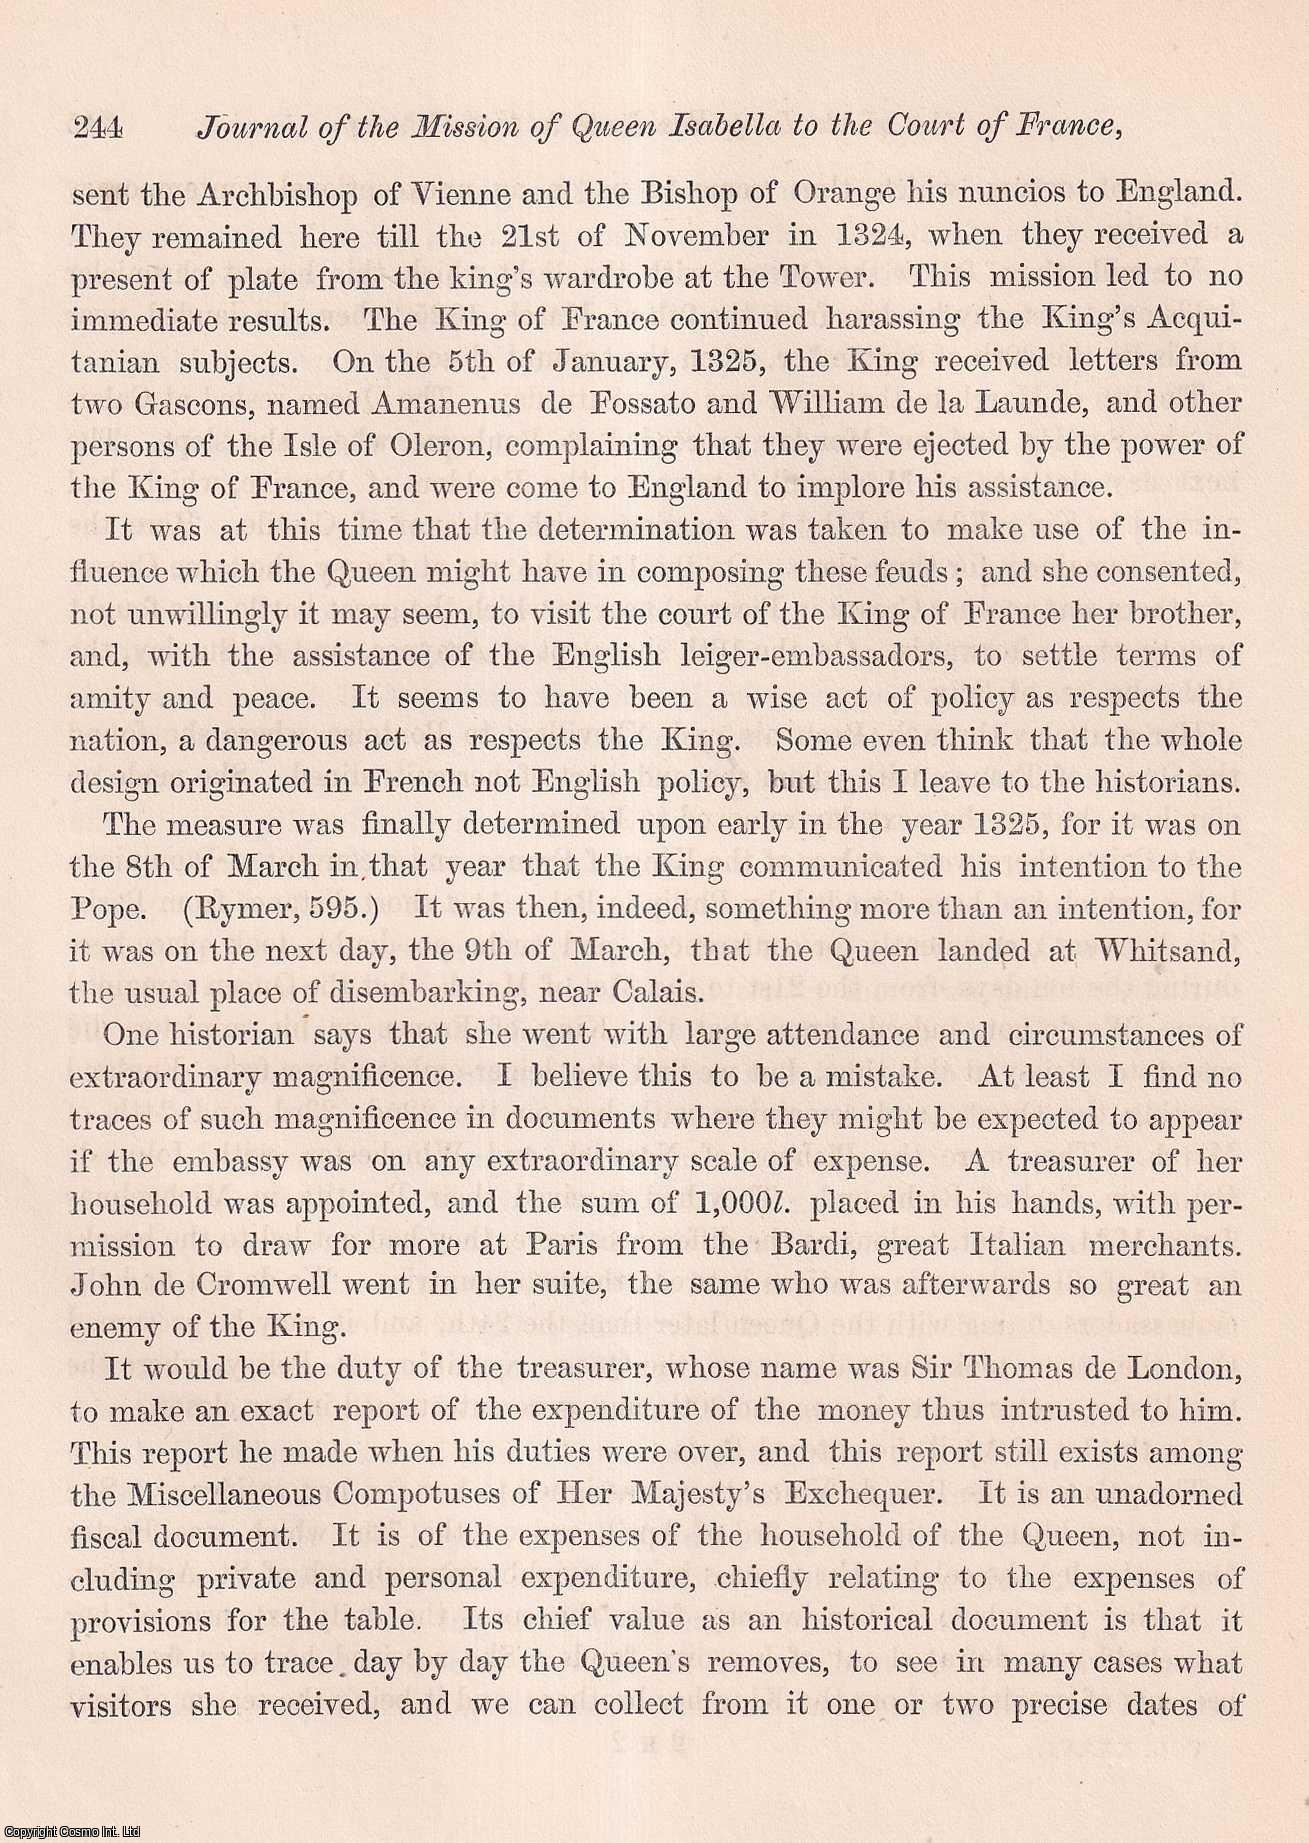 Joseph Hunter - Journal of the Mission of Queen Isabella to the Court of France, and of her long residence in that country. An uncommon original article from the journal Archaeologia, 1855.